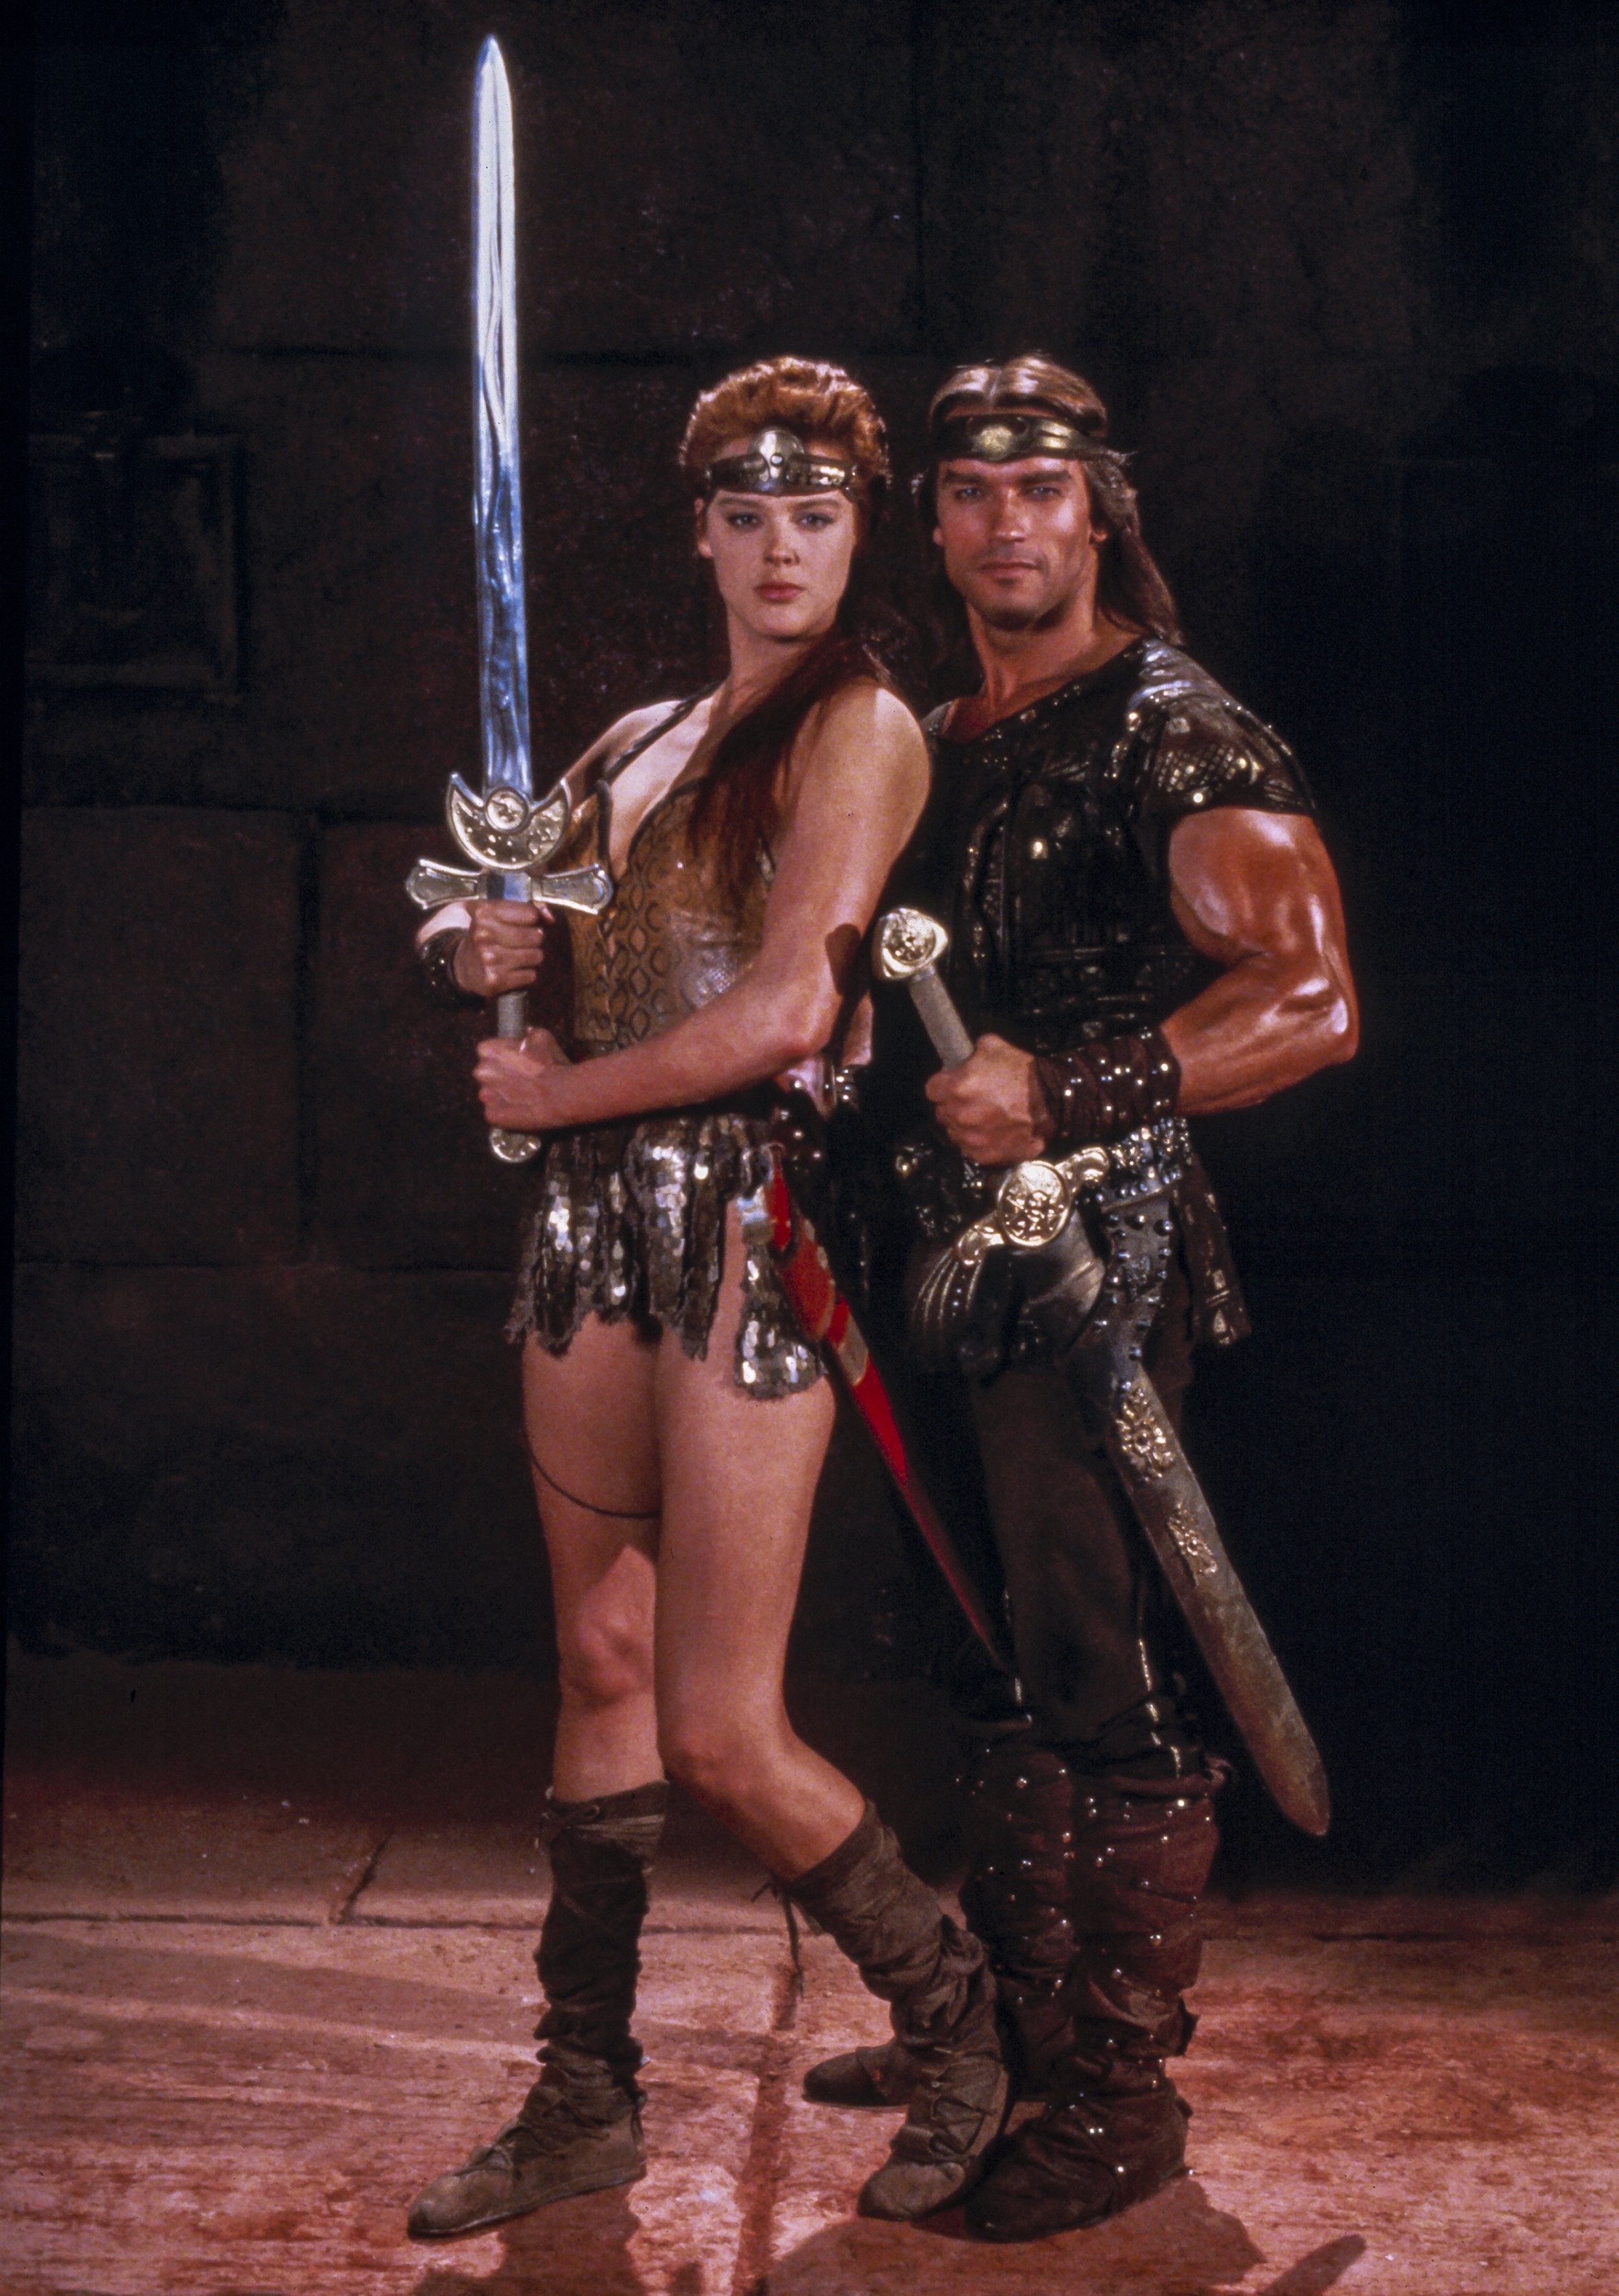 Brigitte Nielsen and Arnold Schwarzenegger in "Red Sonja" in Rome, Italy, 1984. | Source: Getty Images